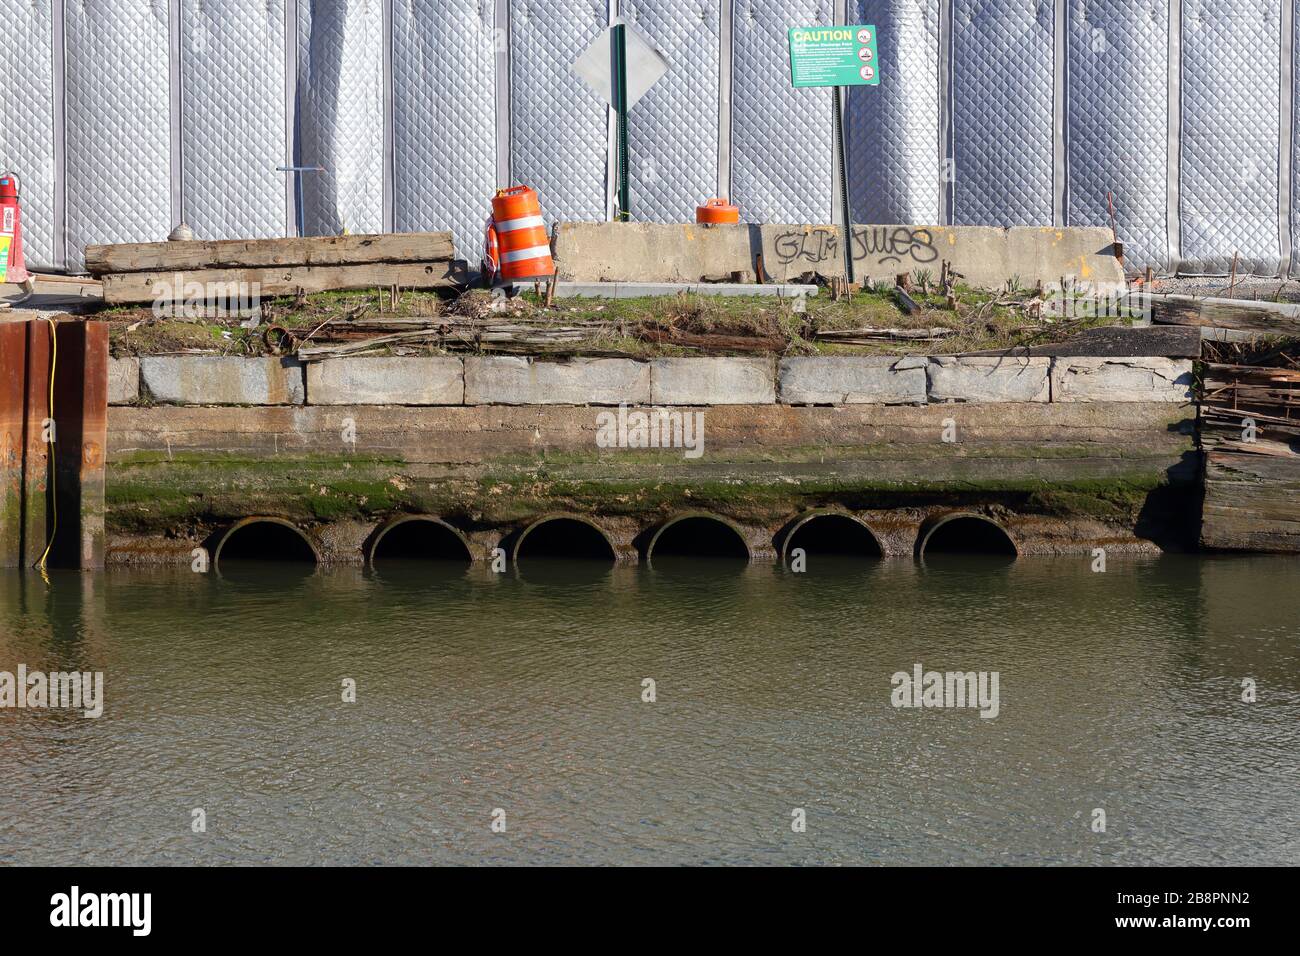 Drainage pipes of a wet weather discharge point in the Gowanus Canal. Stormwater can overwhelm the sewer system resulting in combined sewer overflows. Stock Photo